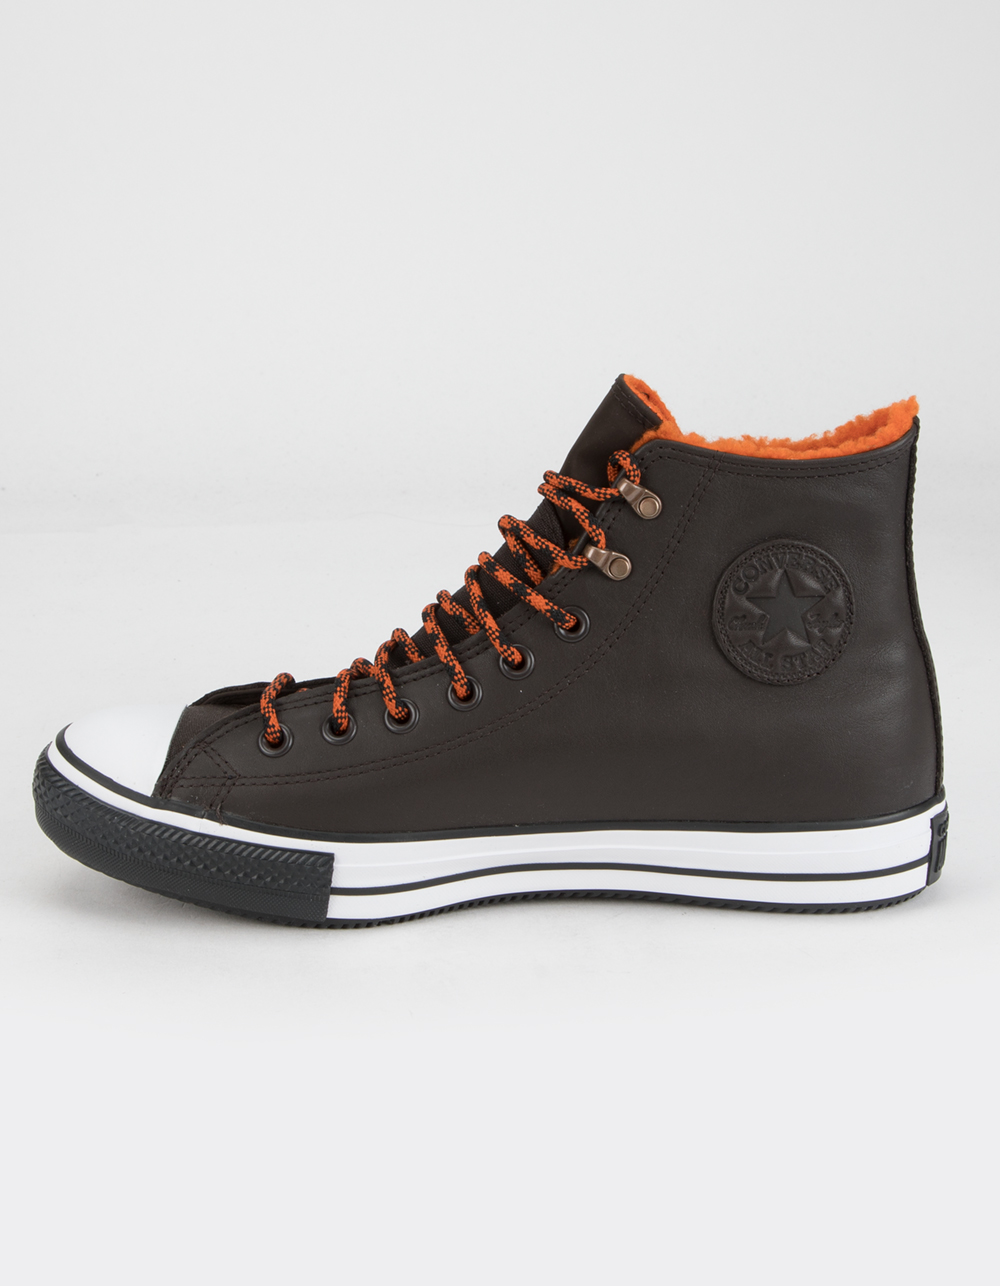 CONVERSE Chuck Taylor All Star Winter Mens High Top Shoes - BROWN COMBO ...